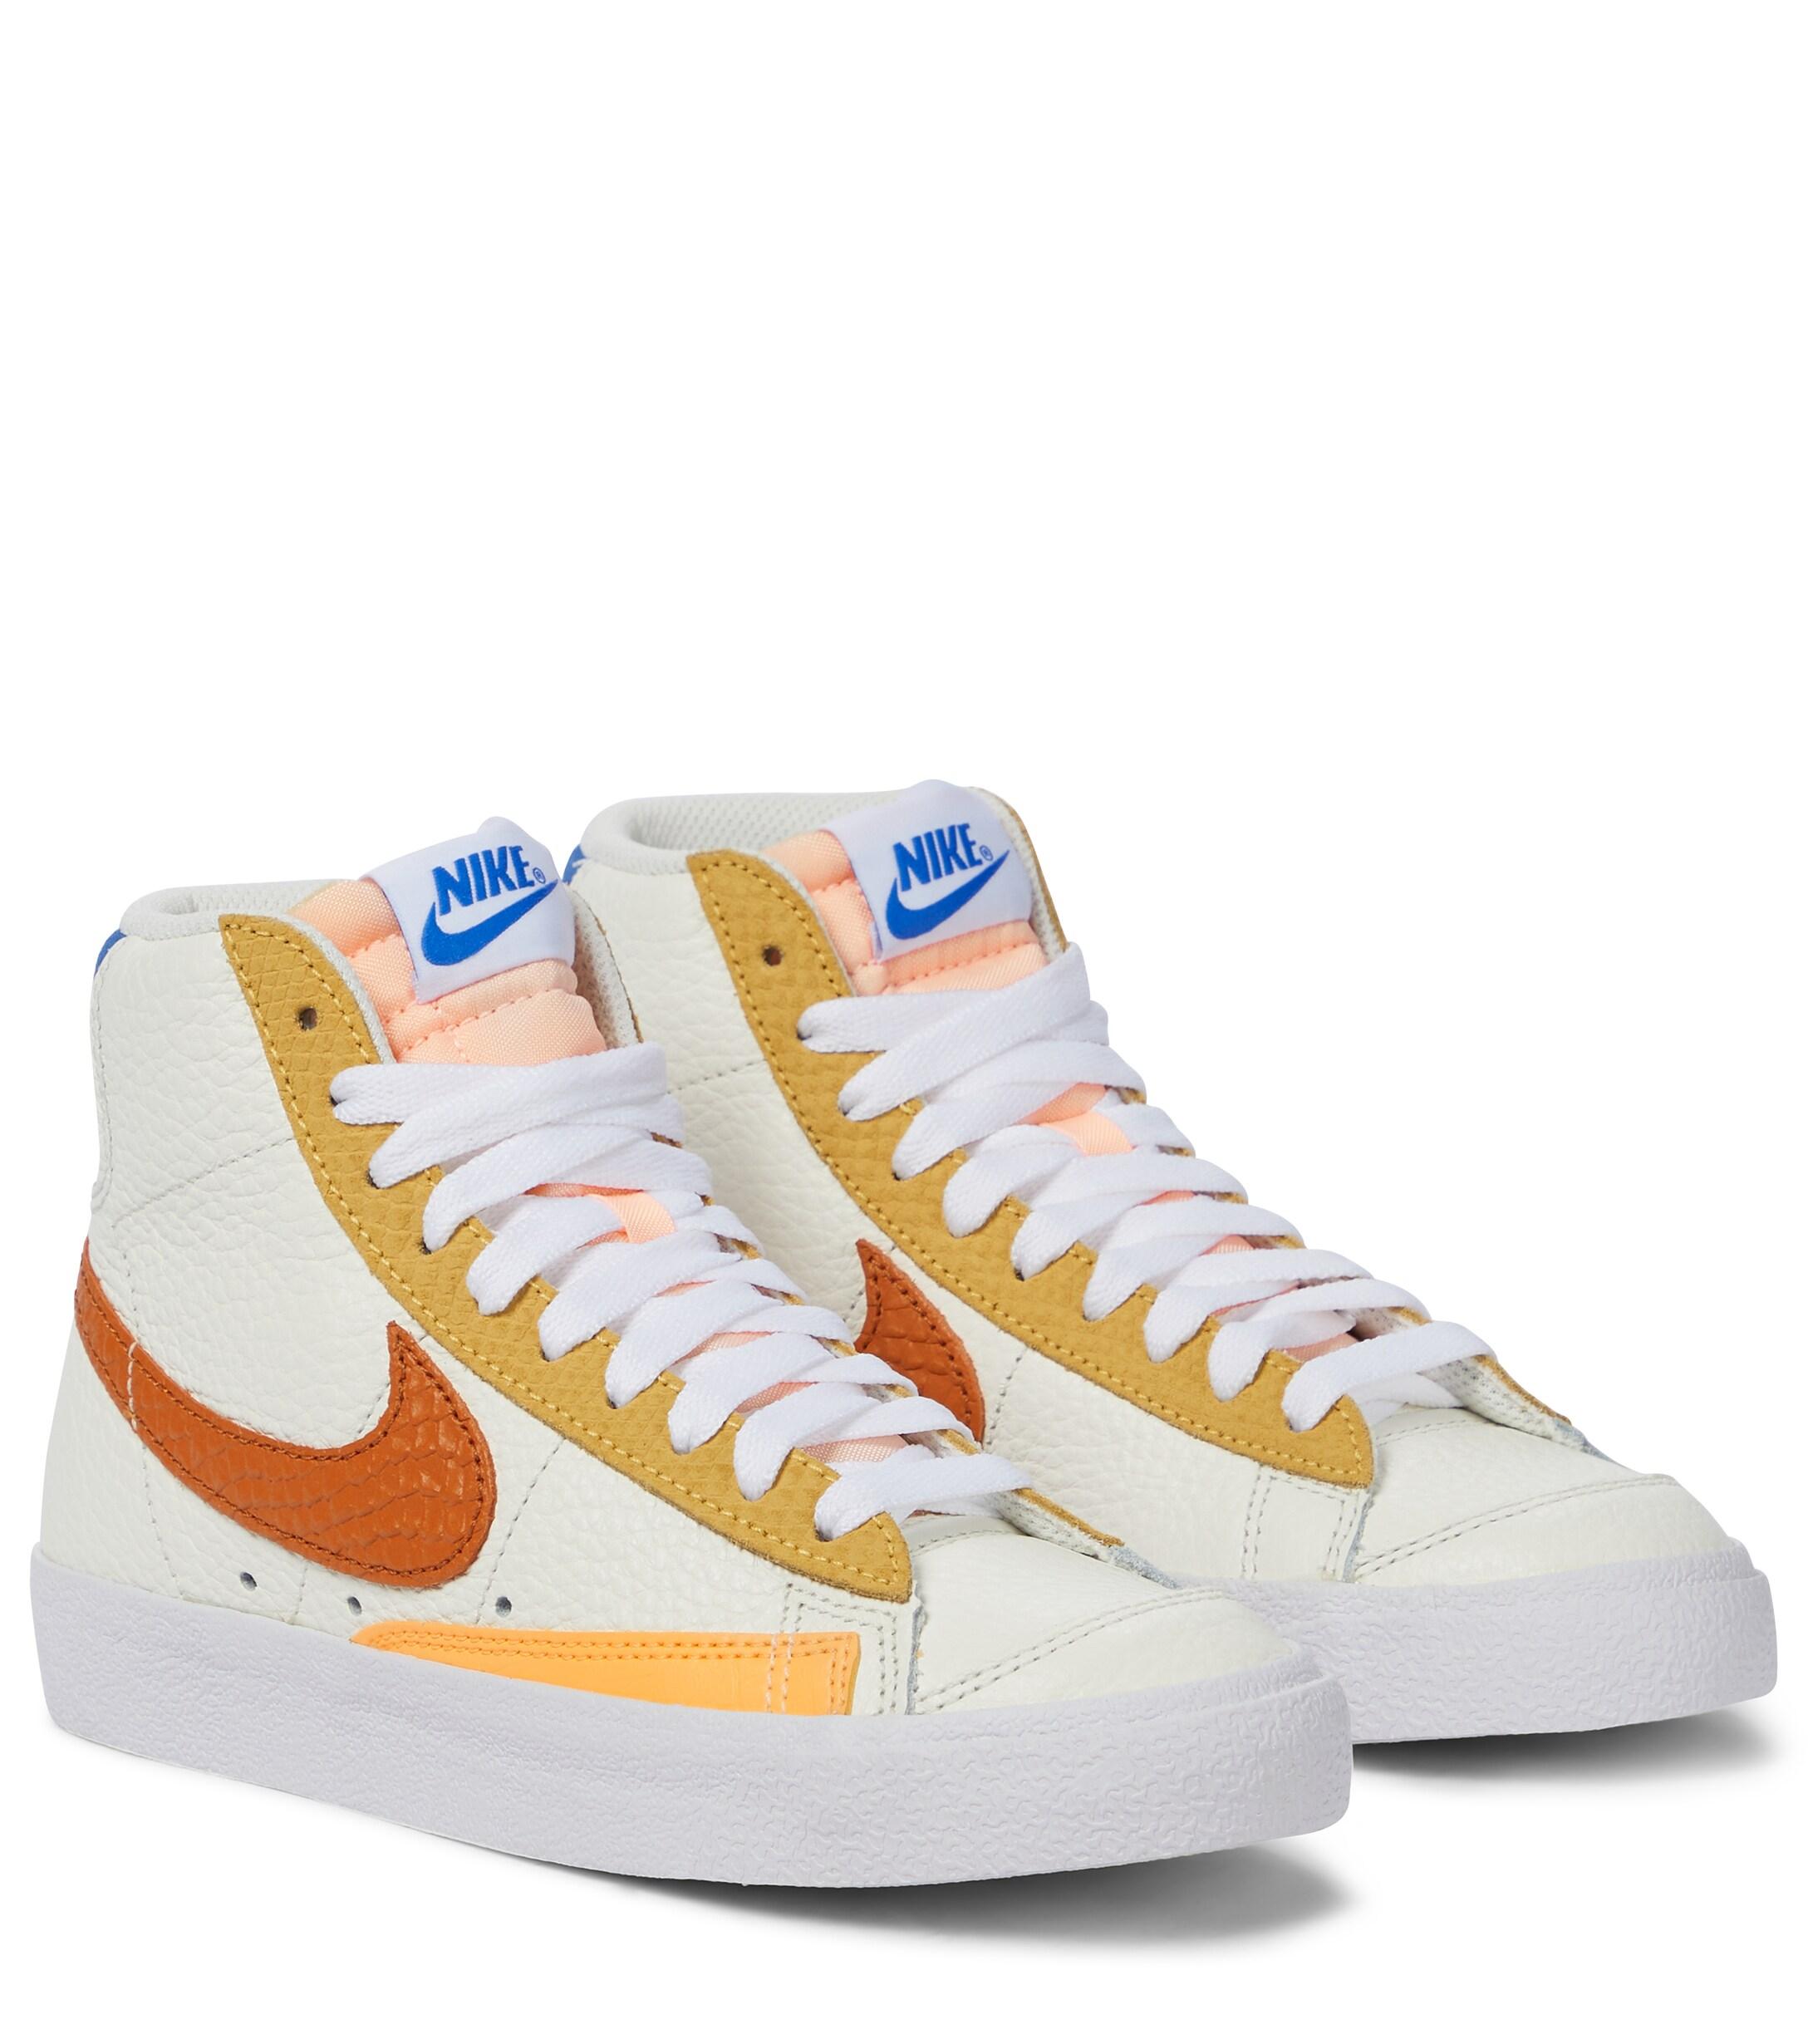 Nike Blazer '77 Leather Sneakers in White | Lyst